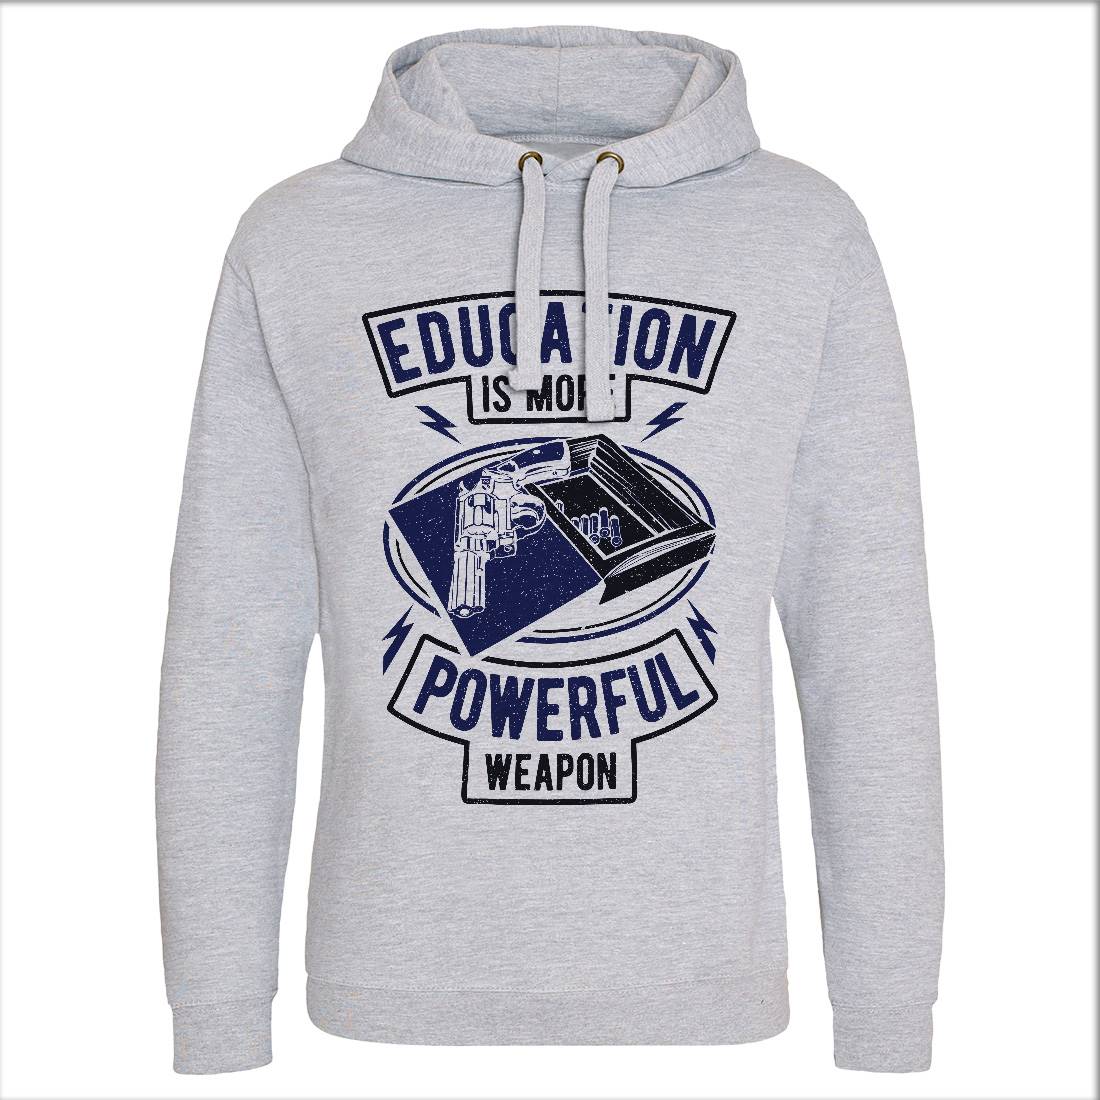 Education Mens Hoodie Without Pocket Quotes A649